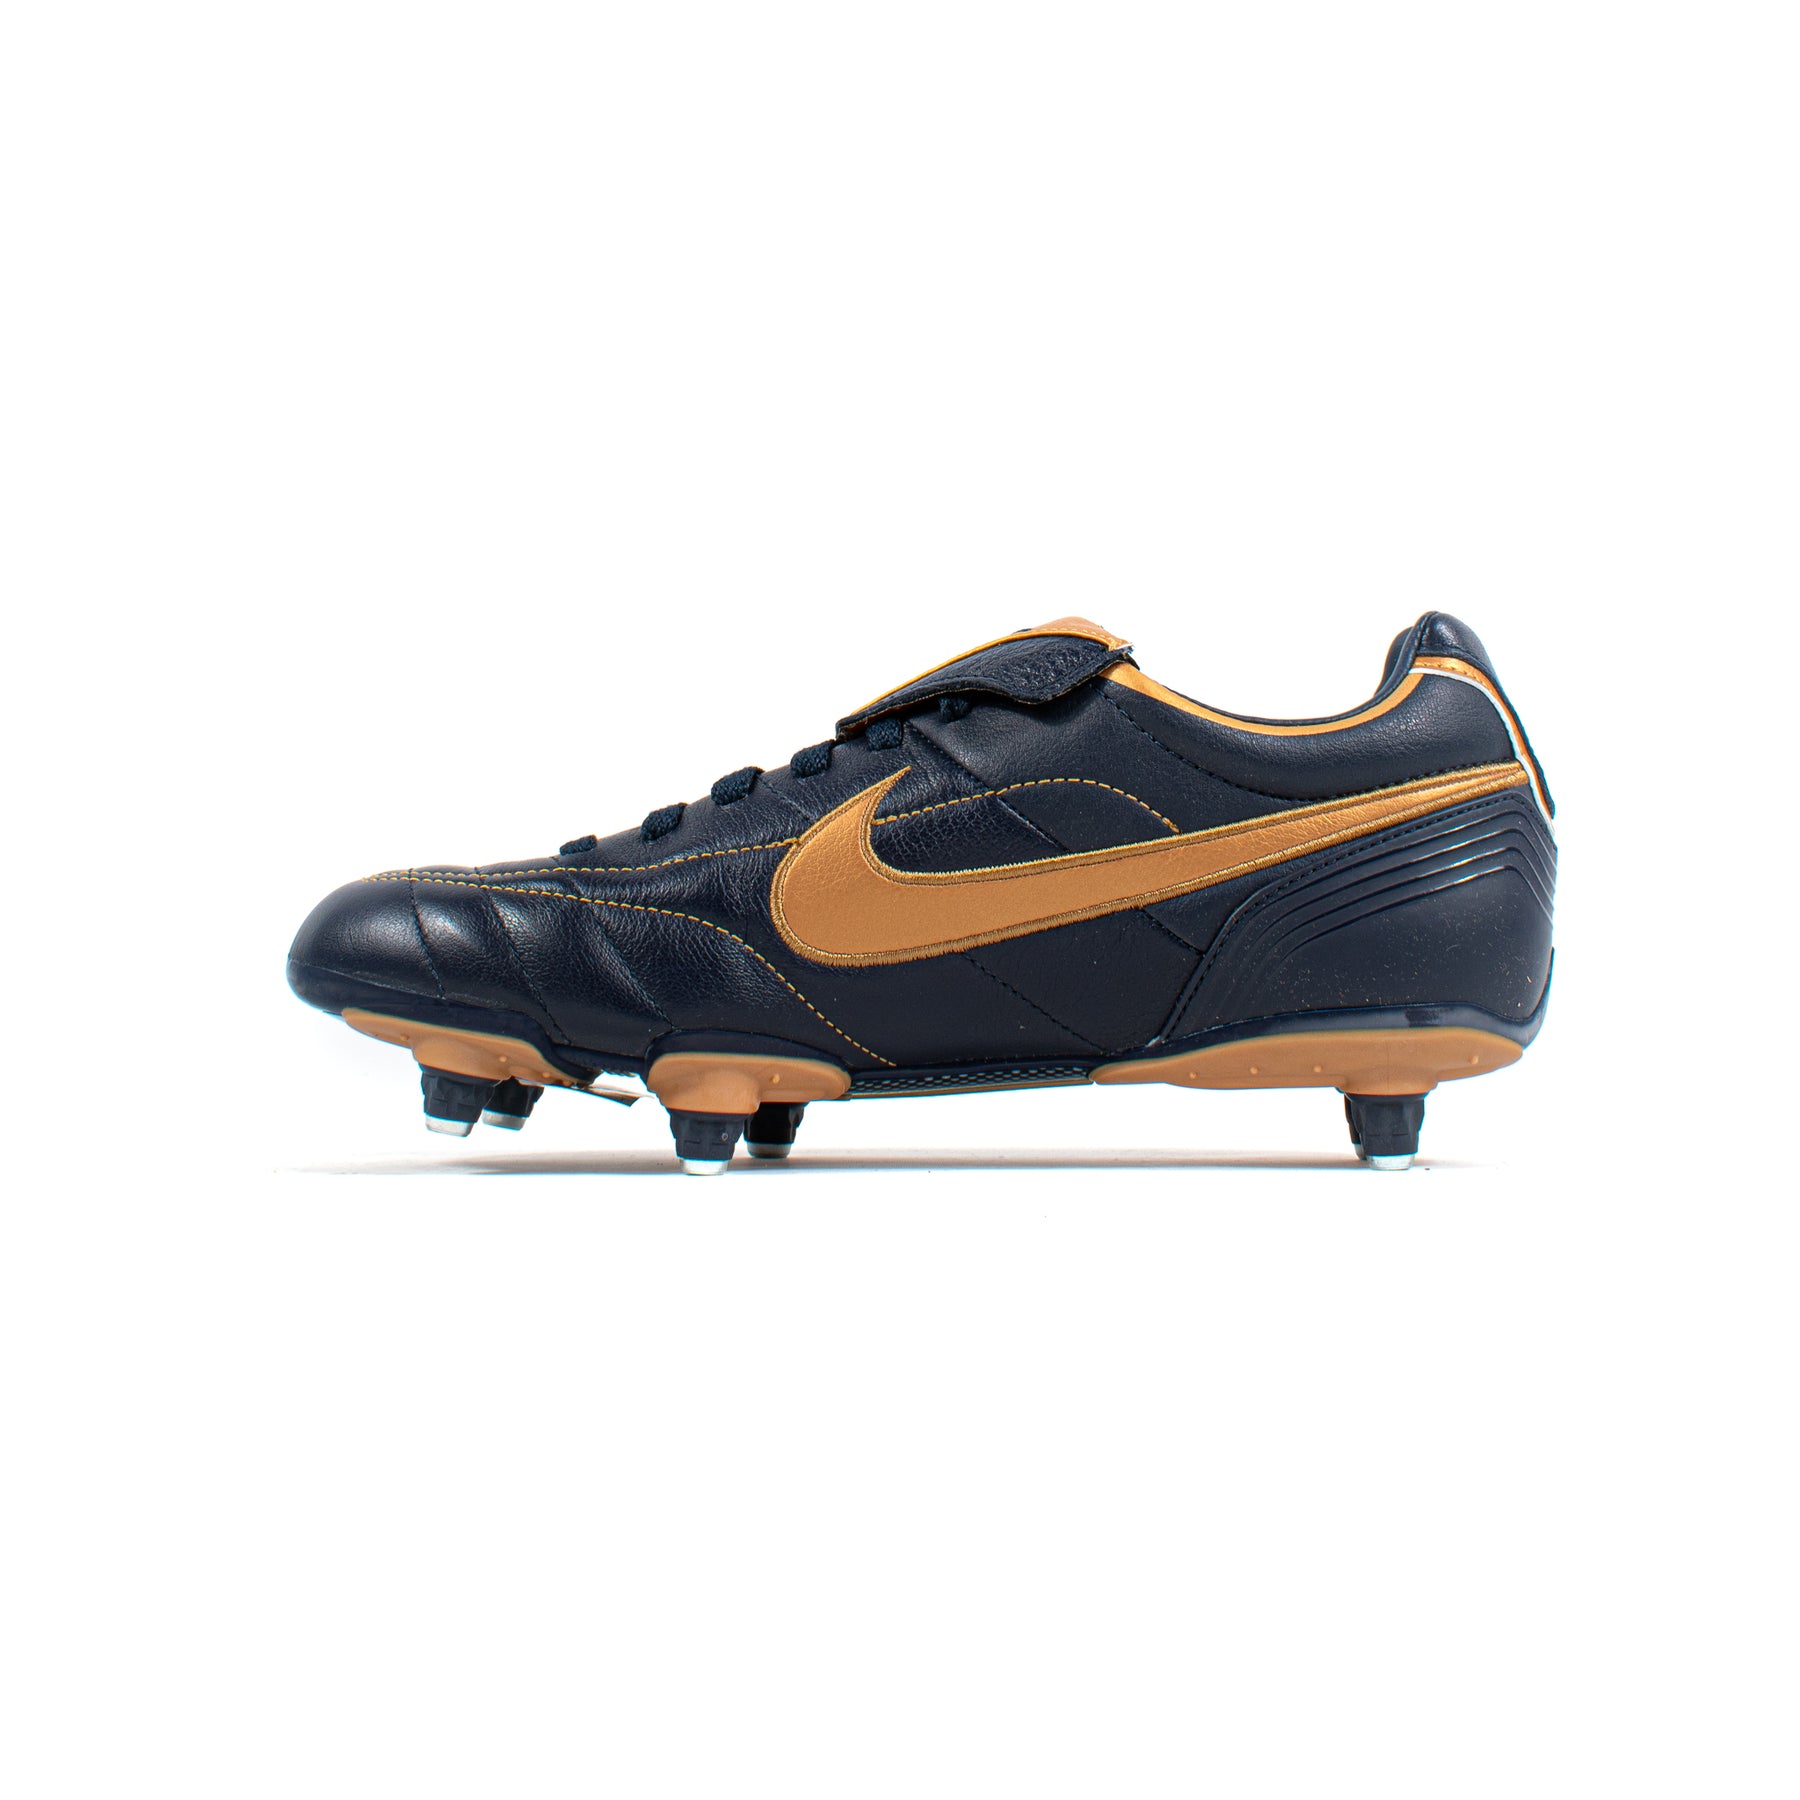 Nike Tiempo Air Legend Navy Gold SG – Soccer Cleats